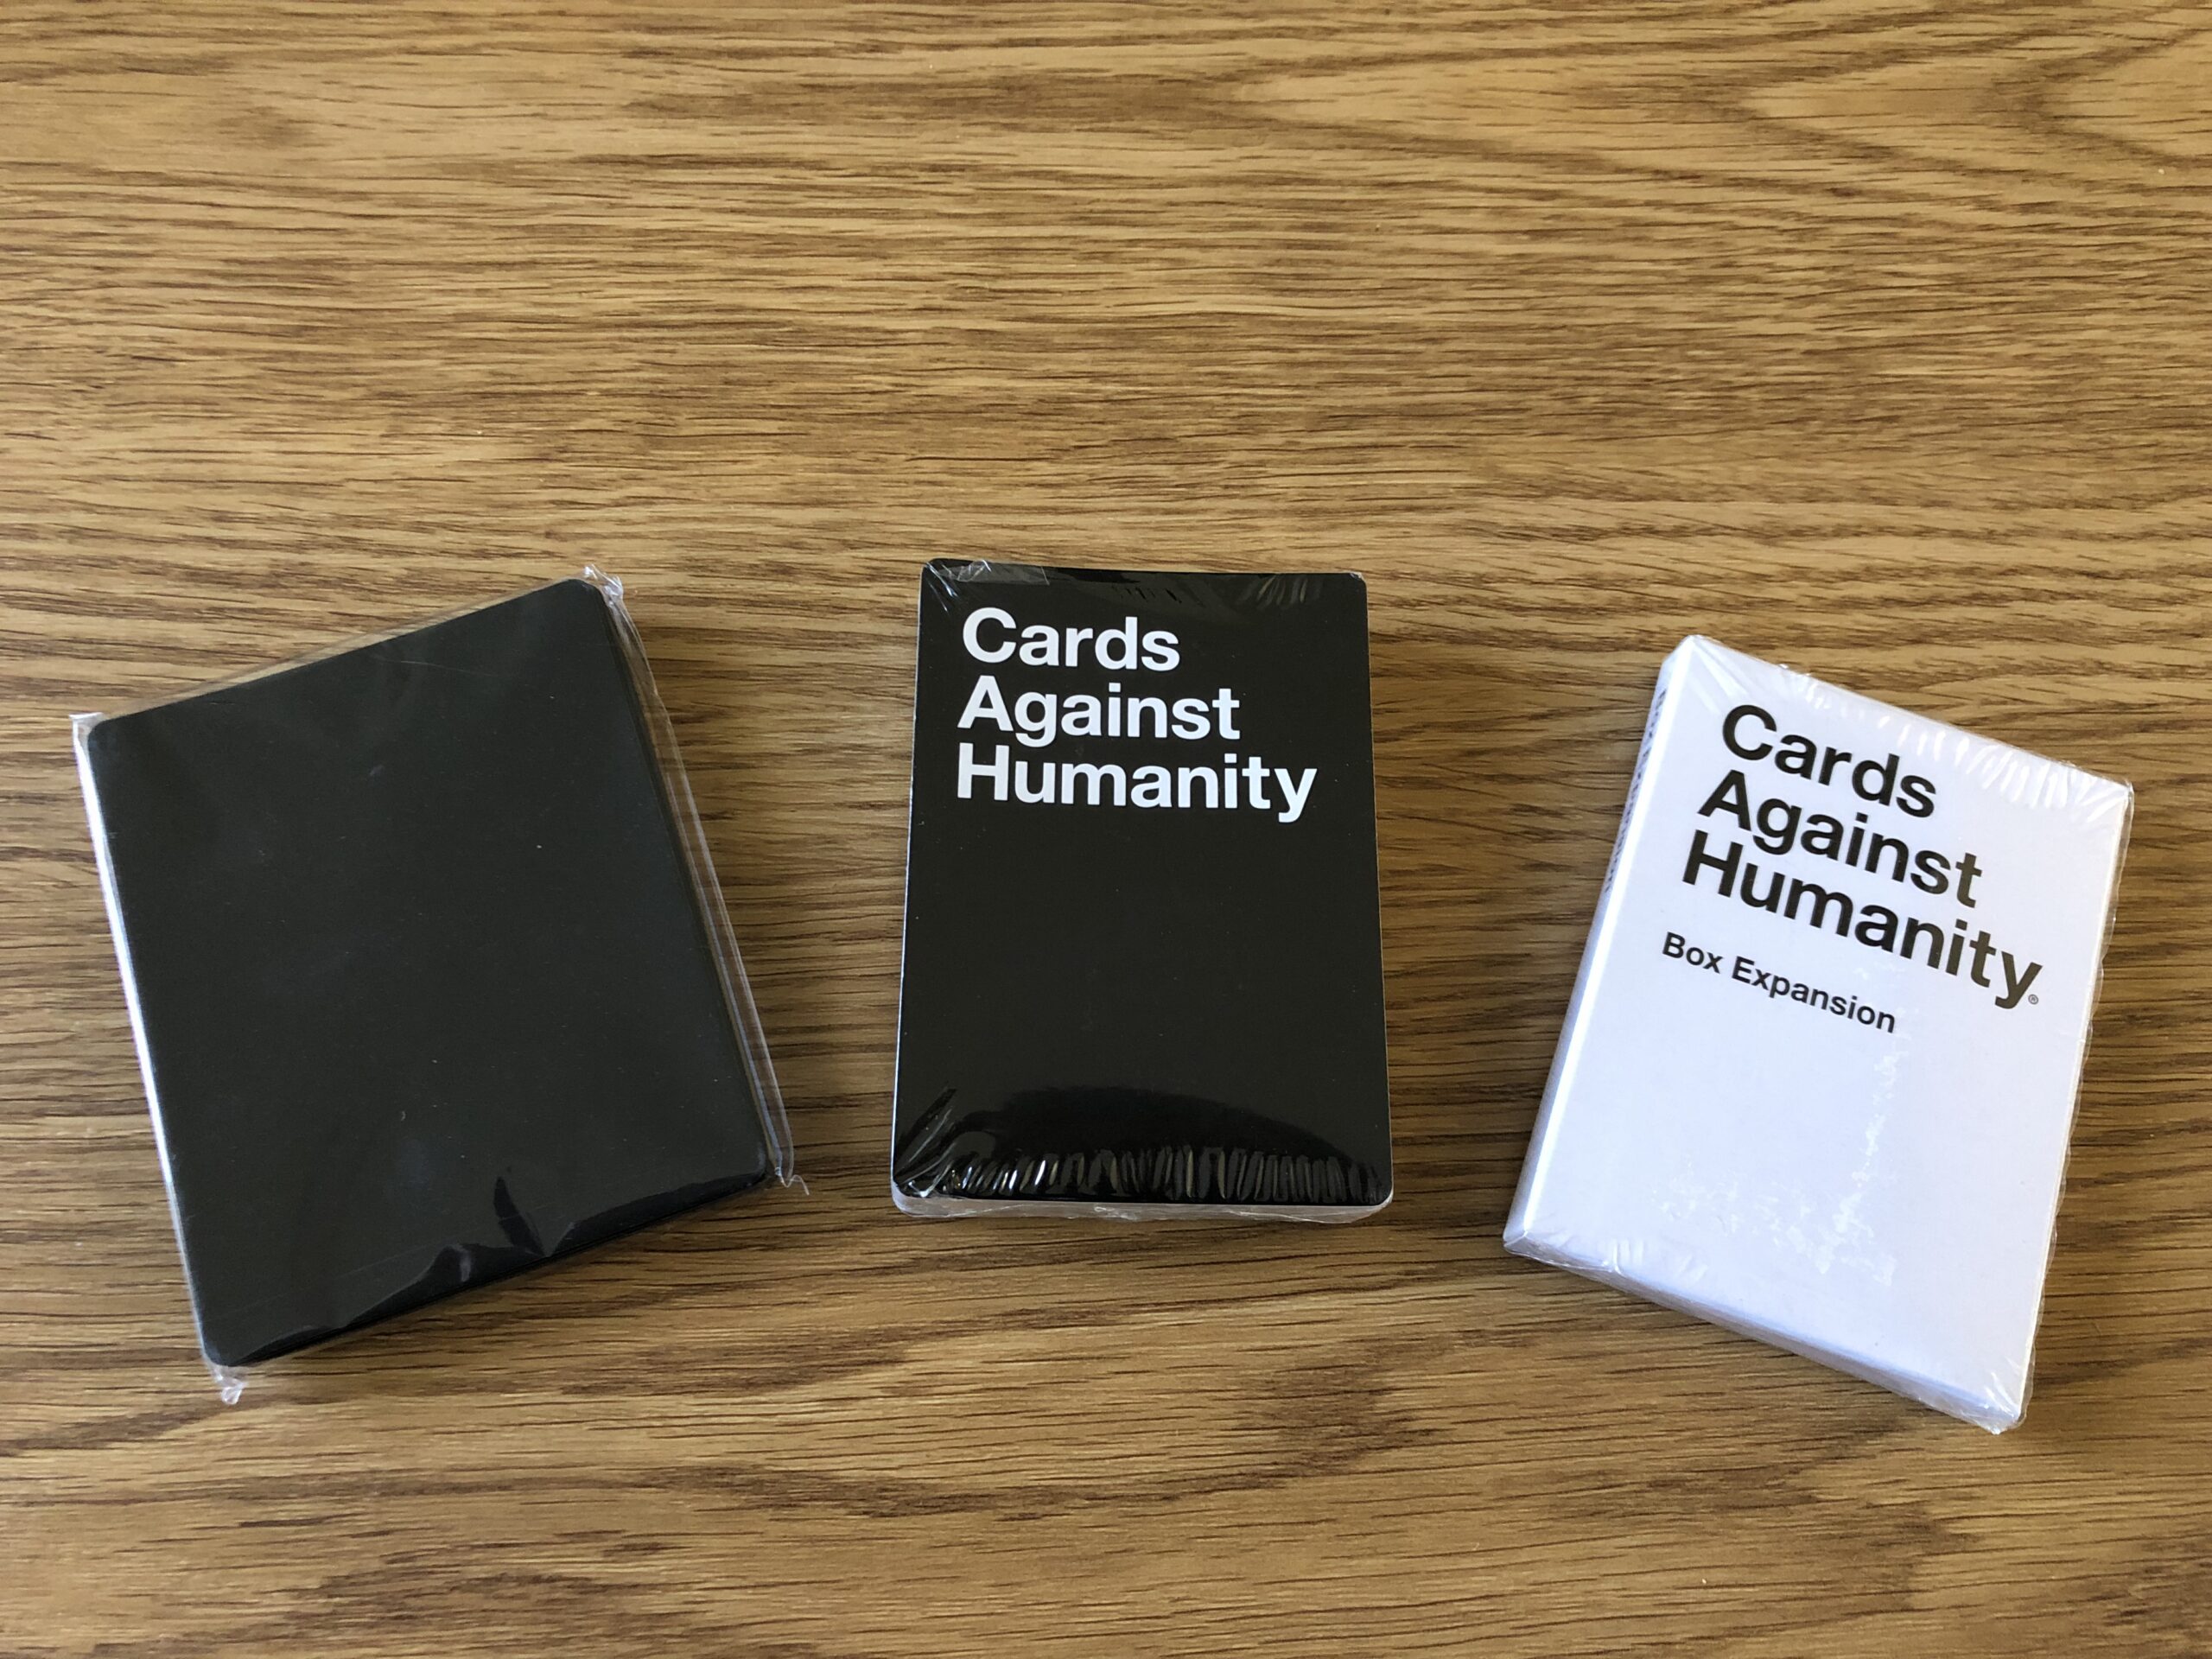 Online "Cards Against Humanity" Board Game